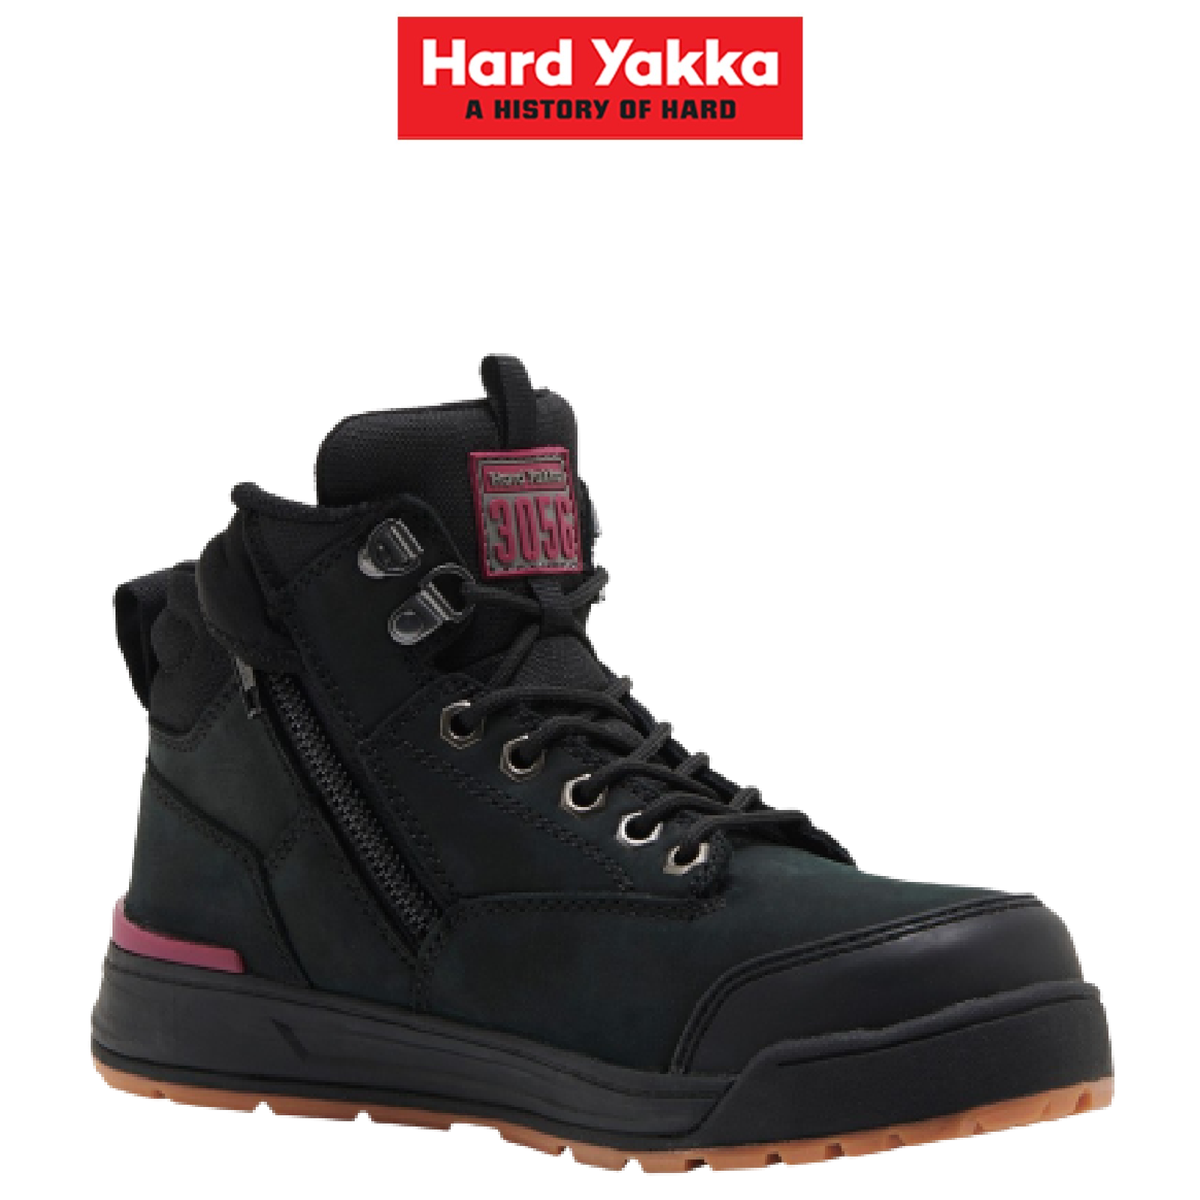 Hard Yakka Womens 3056 Boots Water Resistant Leather Work Safety Toe Boot Y60245